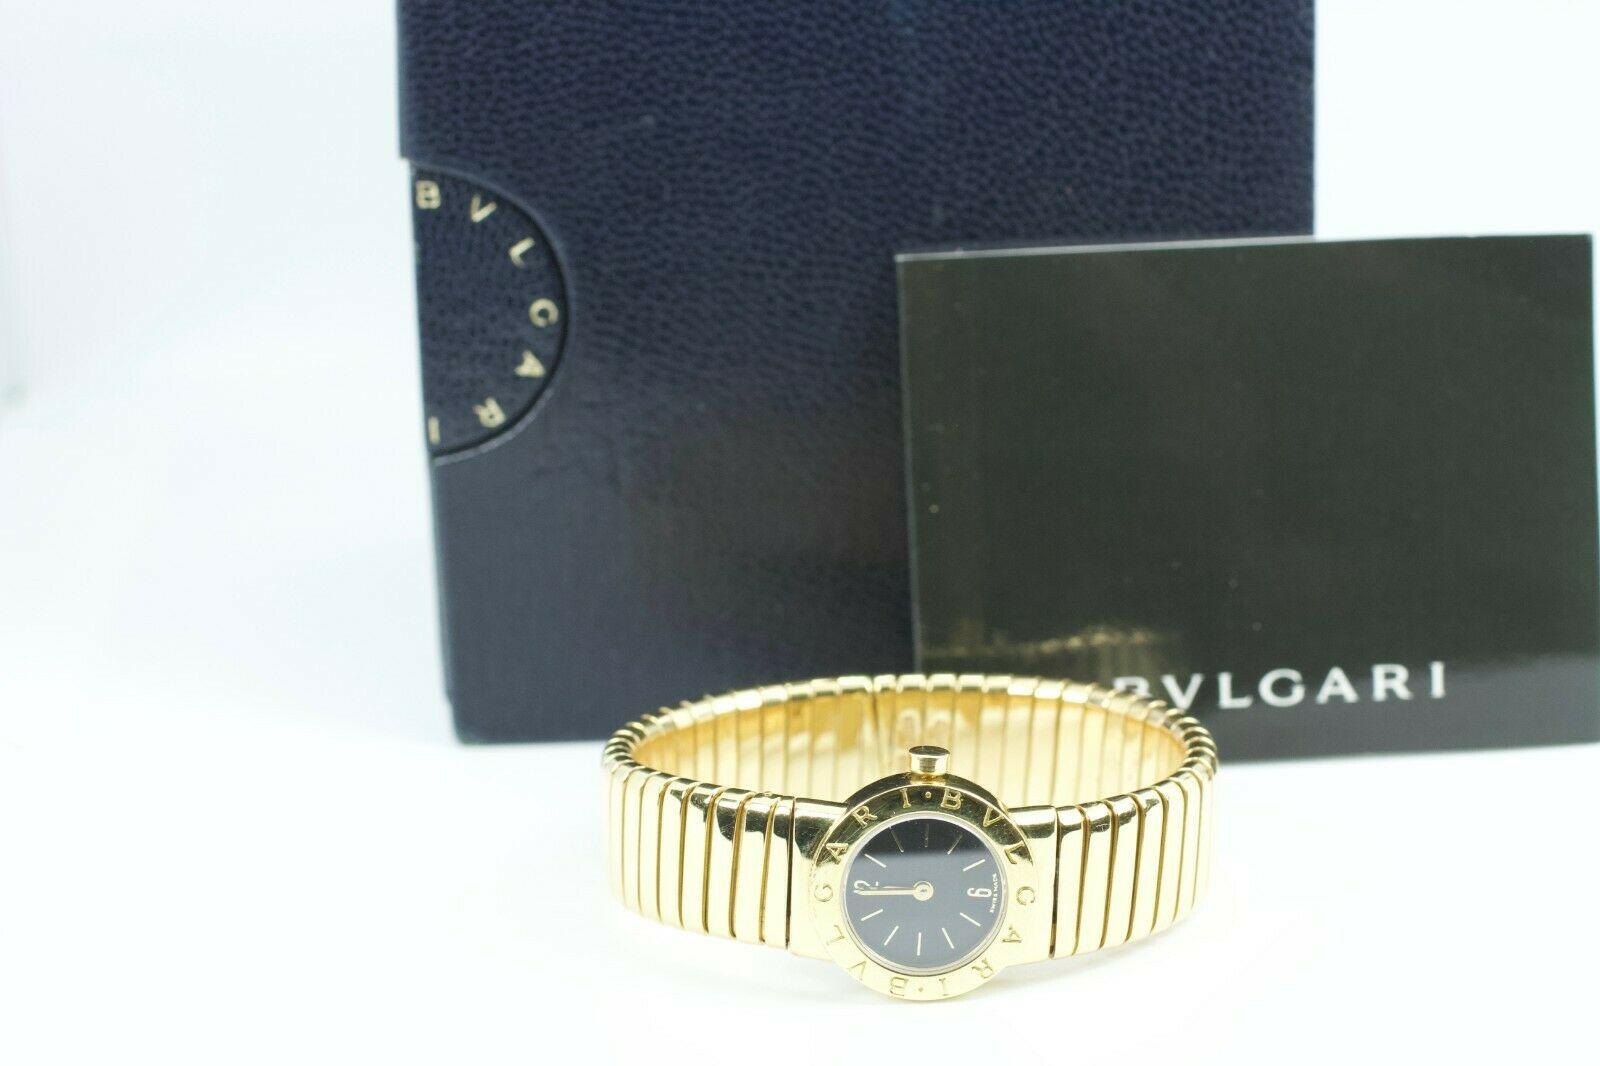 BVLGARI Tubogas 18k Solid Gold Wristwatch 

Fits 6-7 Inch wrists

58.8 Grams 

19mm Wide 

This is a beautiful dainty watch that comes with its original box and warranty card. This bracelet is in great condition for its age. The watch was just